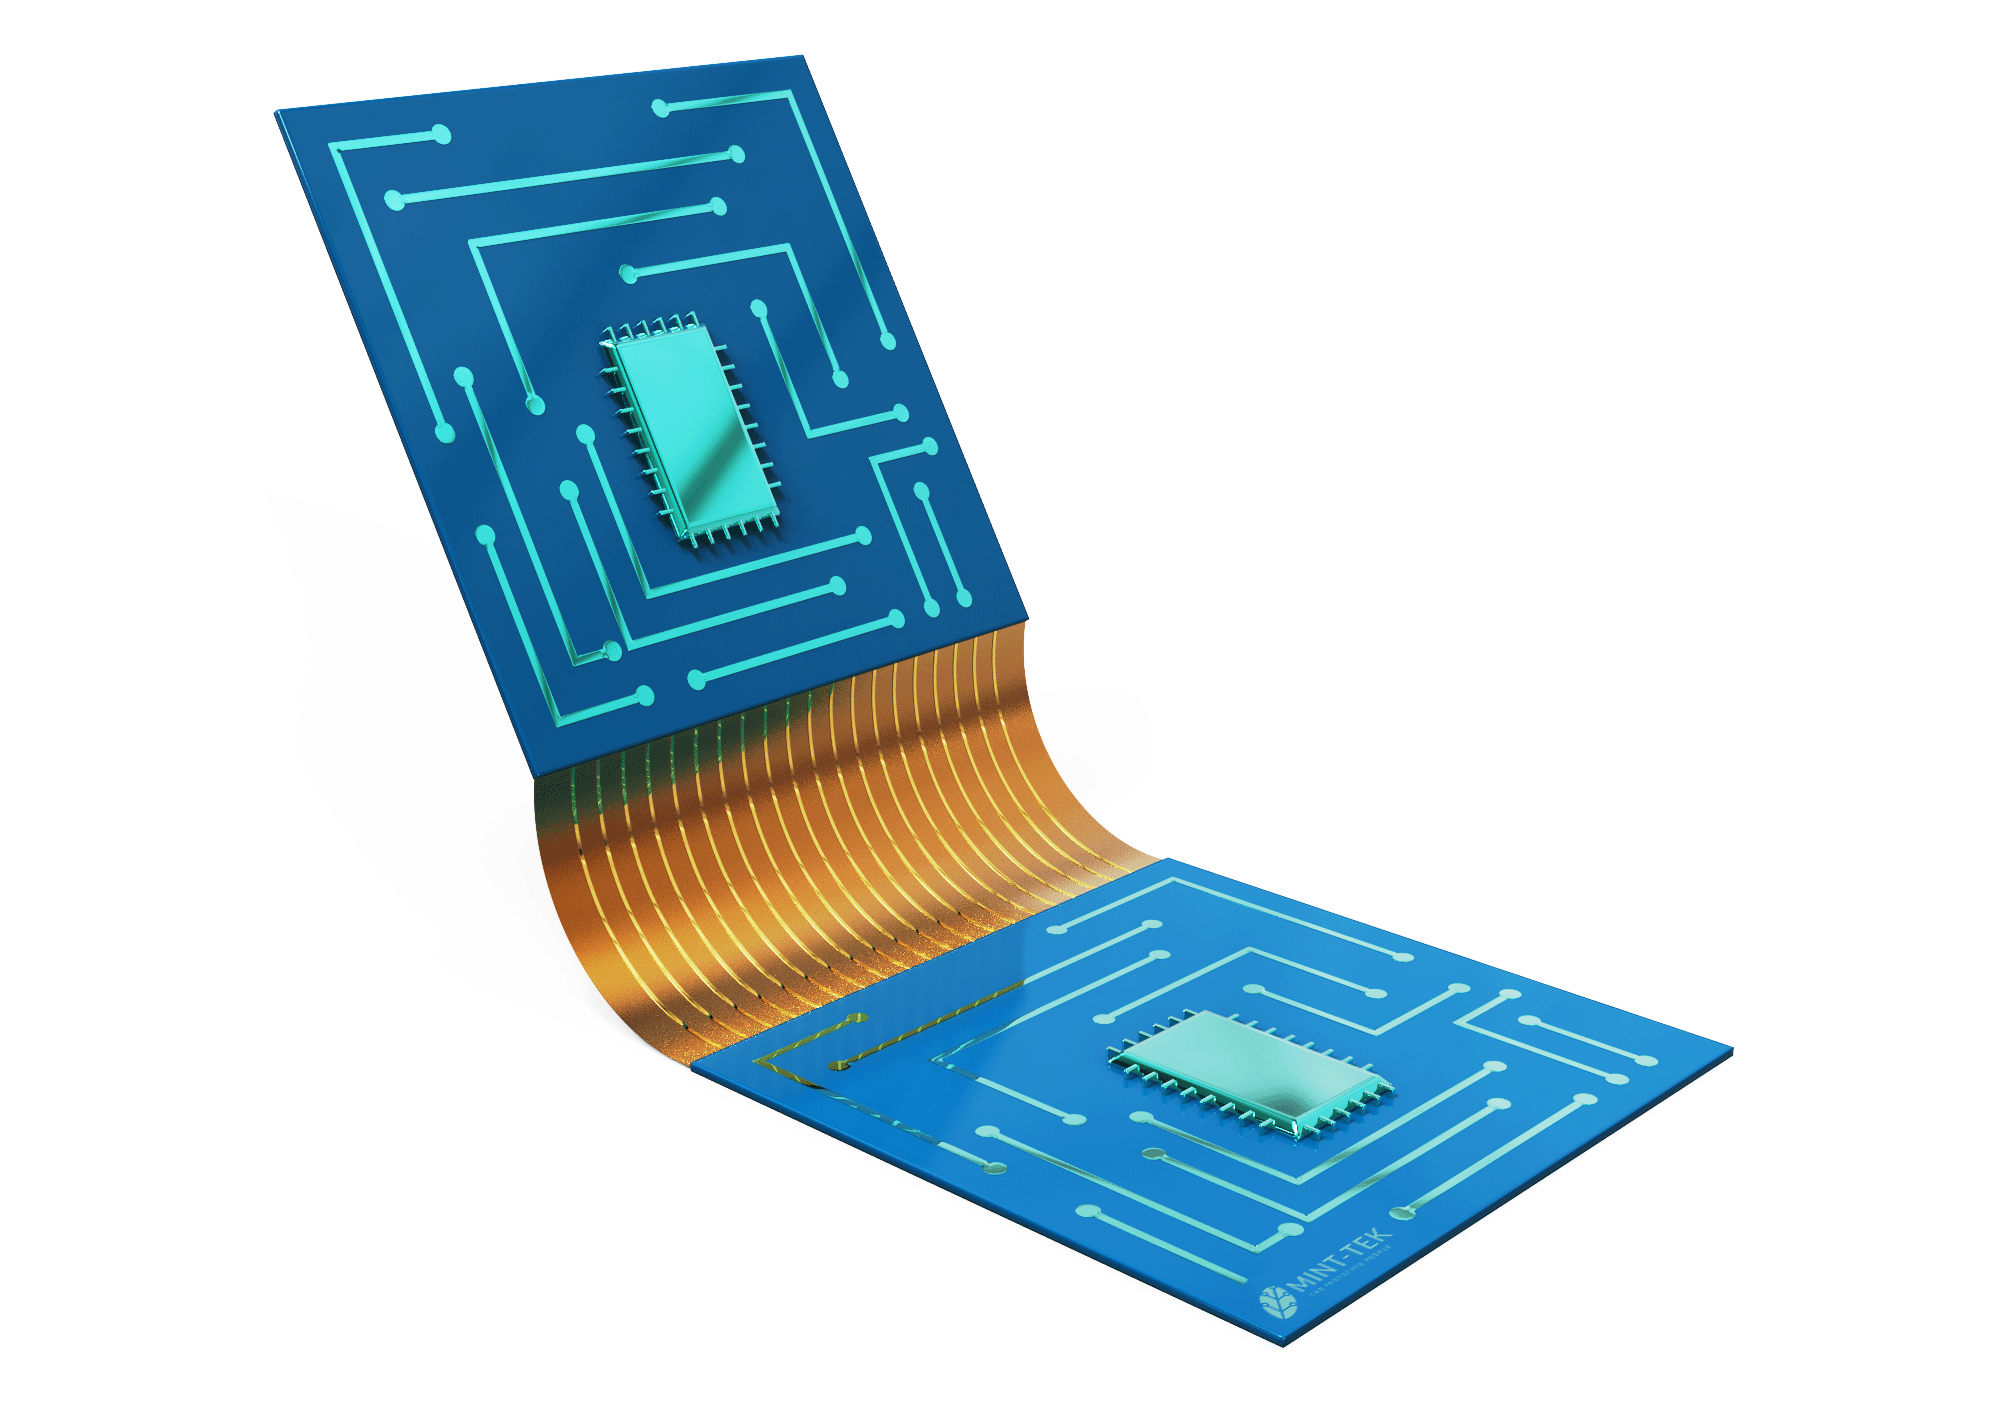 Our PCB Capabilities